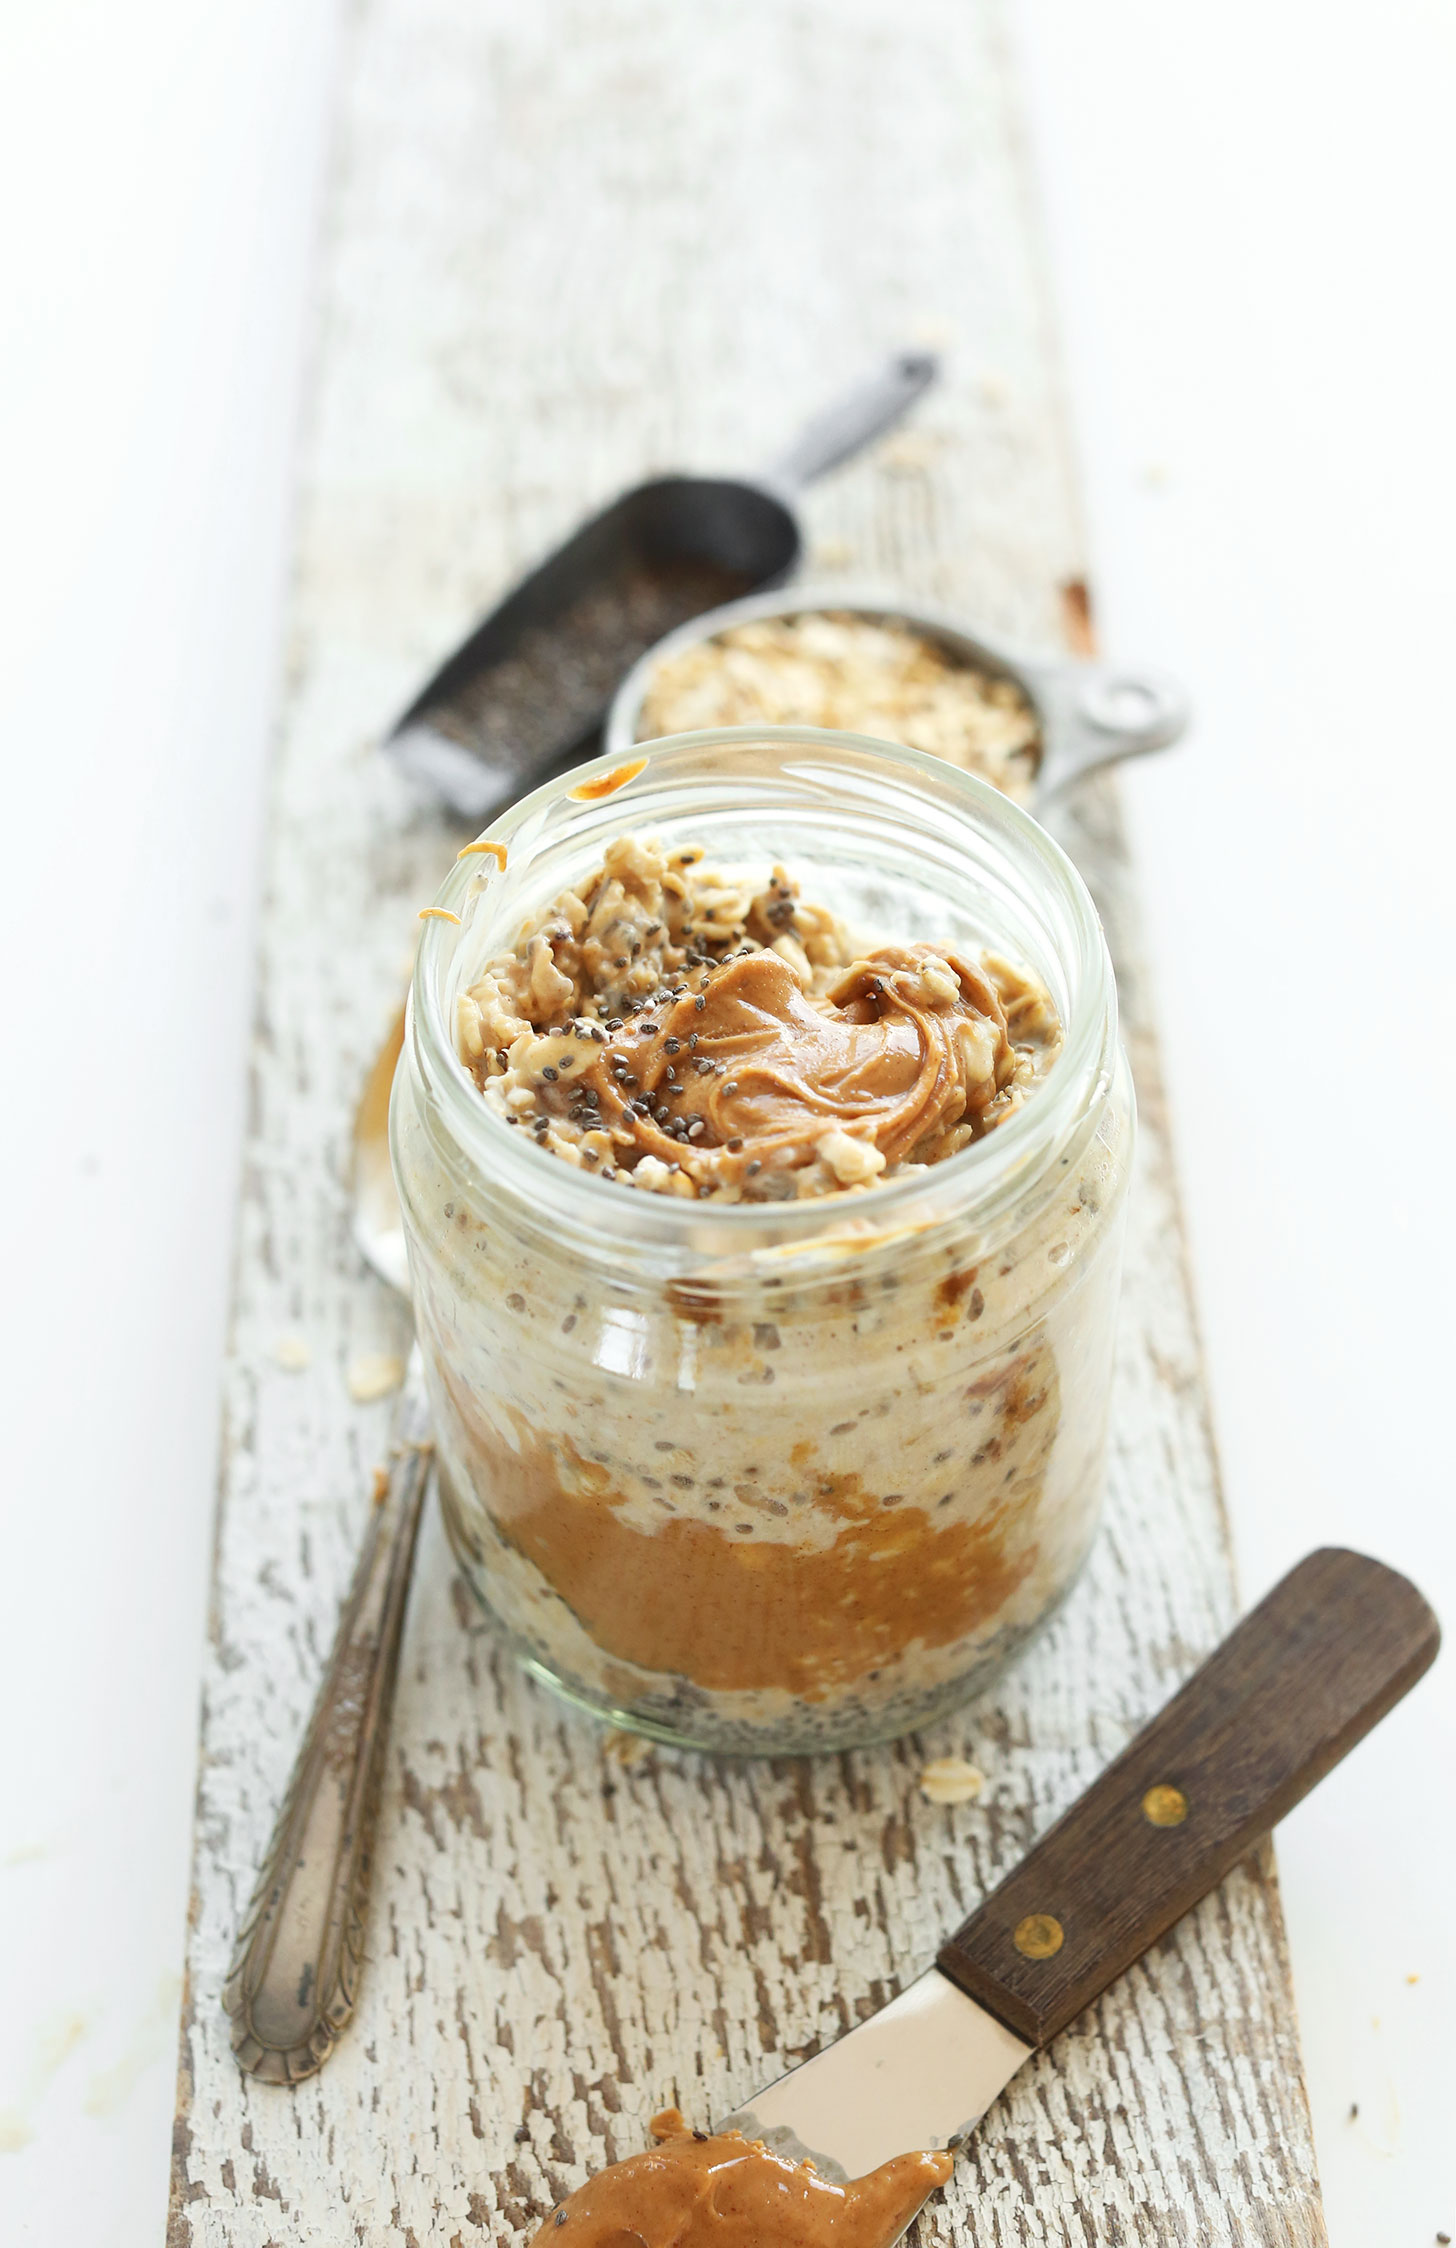 Jar of our simple and amazing vegan Peanut Butter Overnight Oats recipe